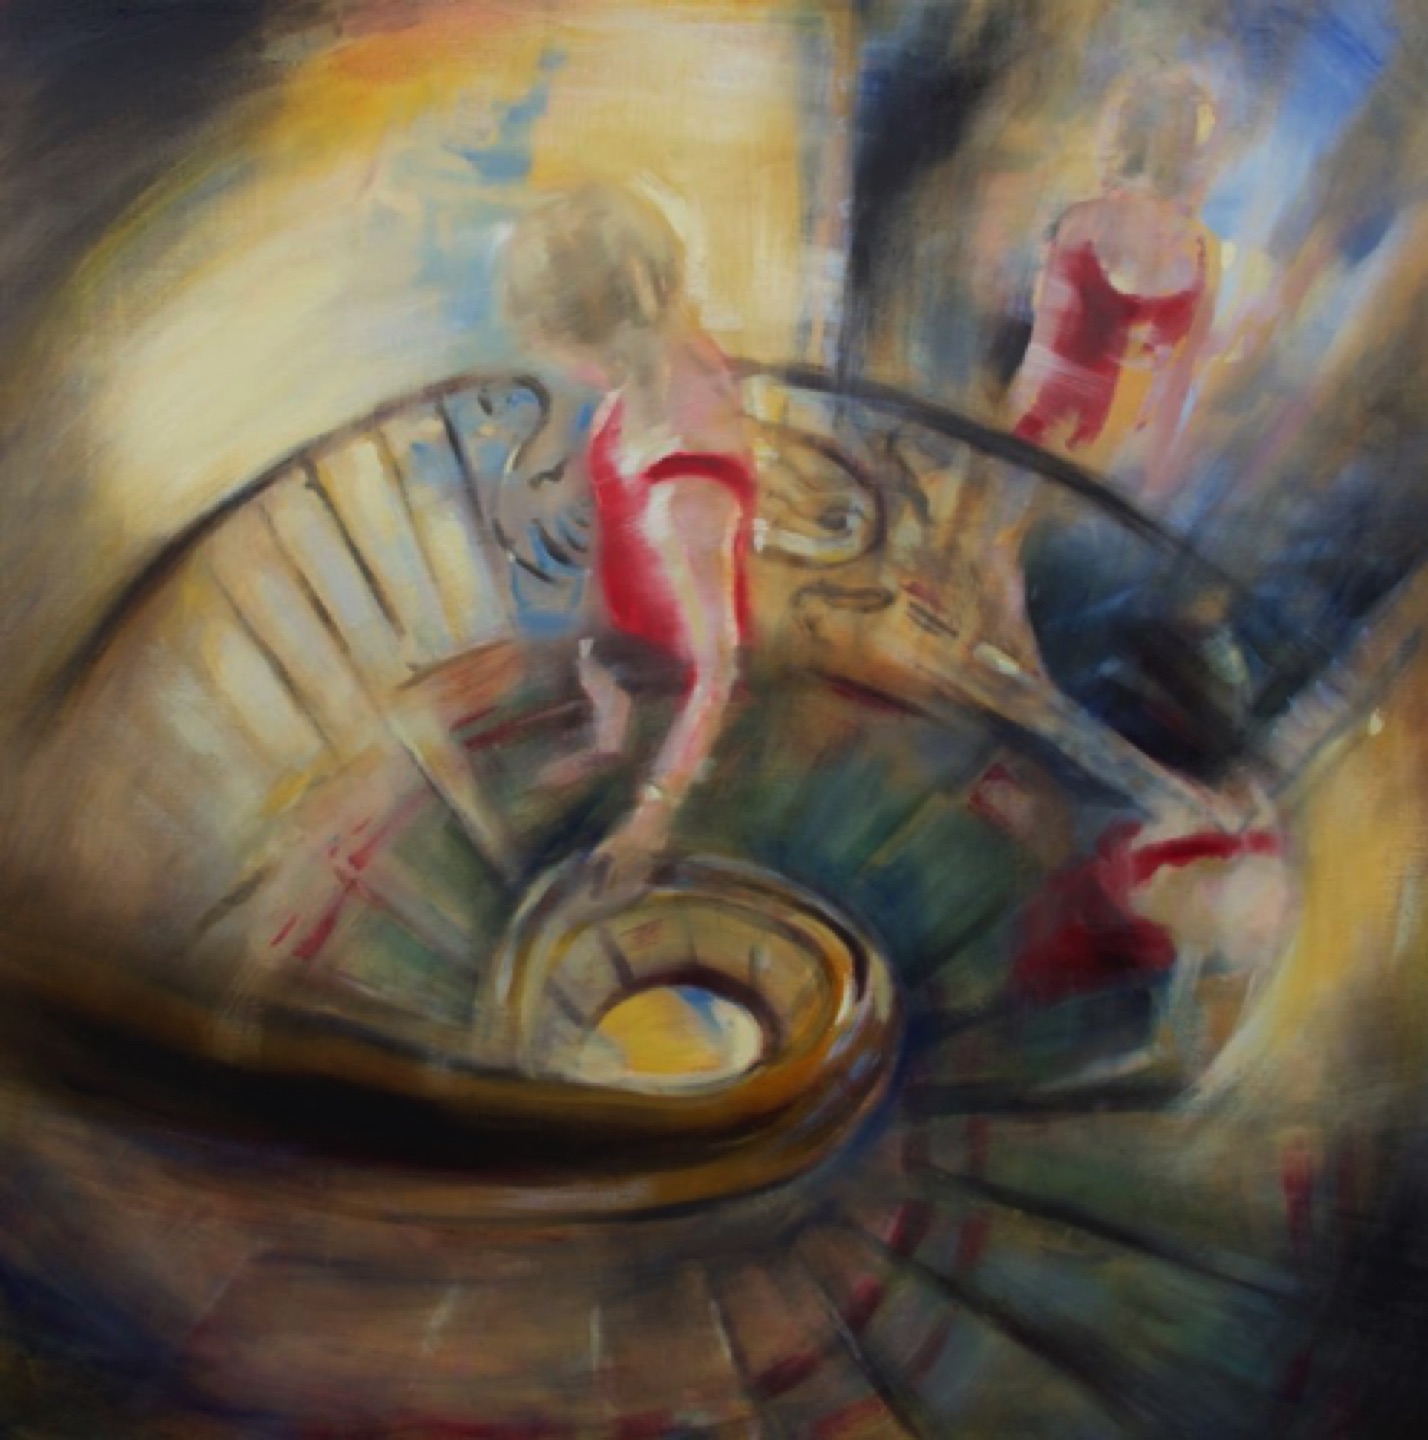 Gregg Chadwick
Moreau's Spiral
40"x40" oil on linen 2015 
Private Collection, Los Angeles, California